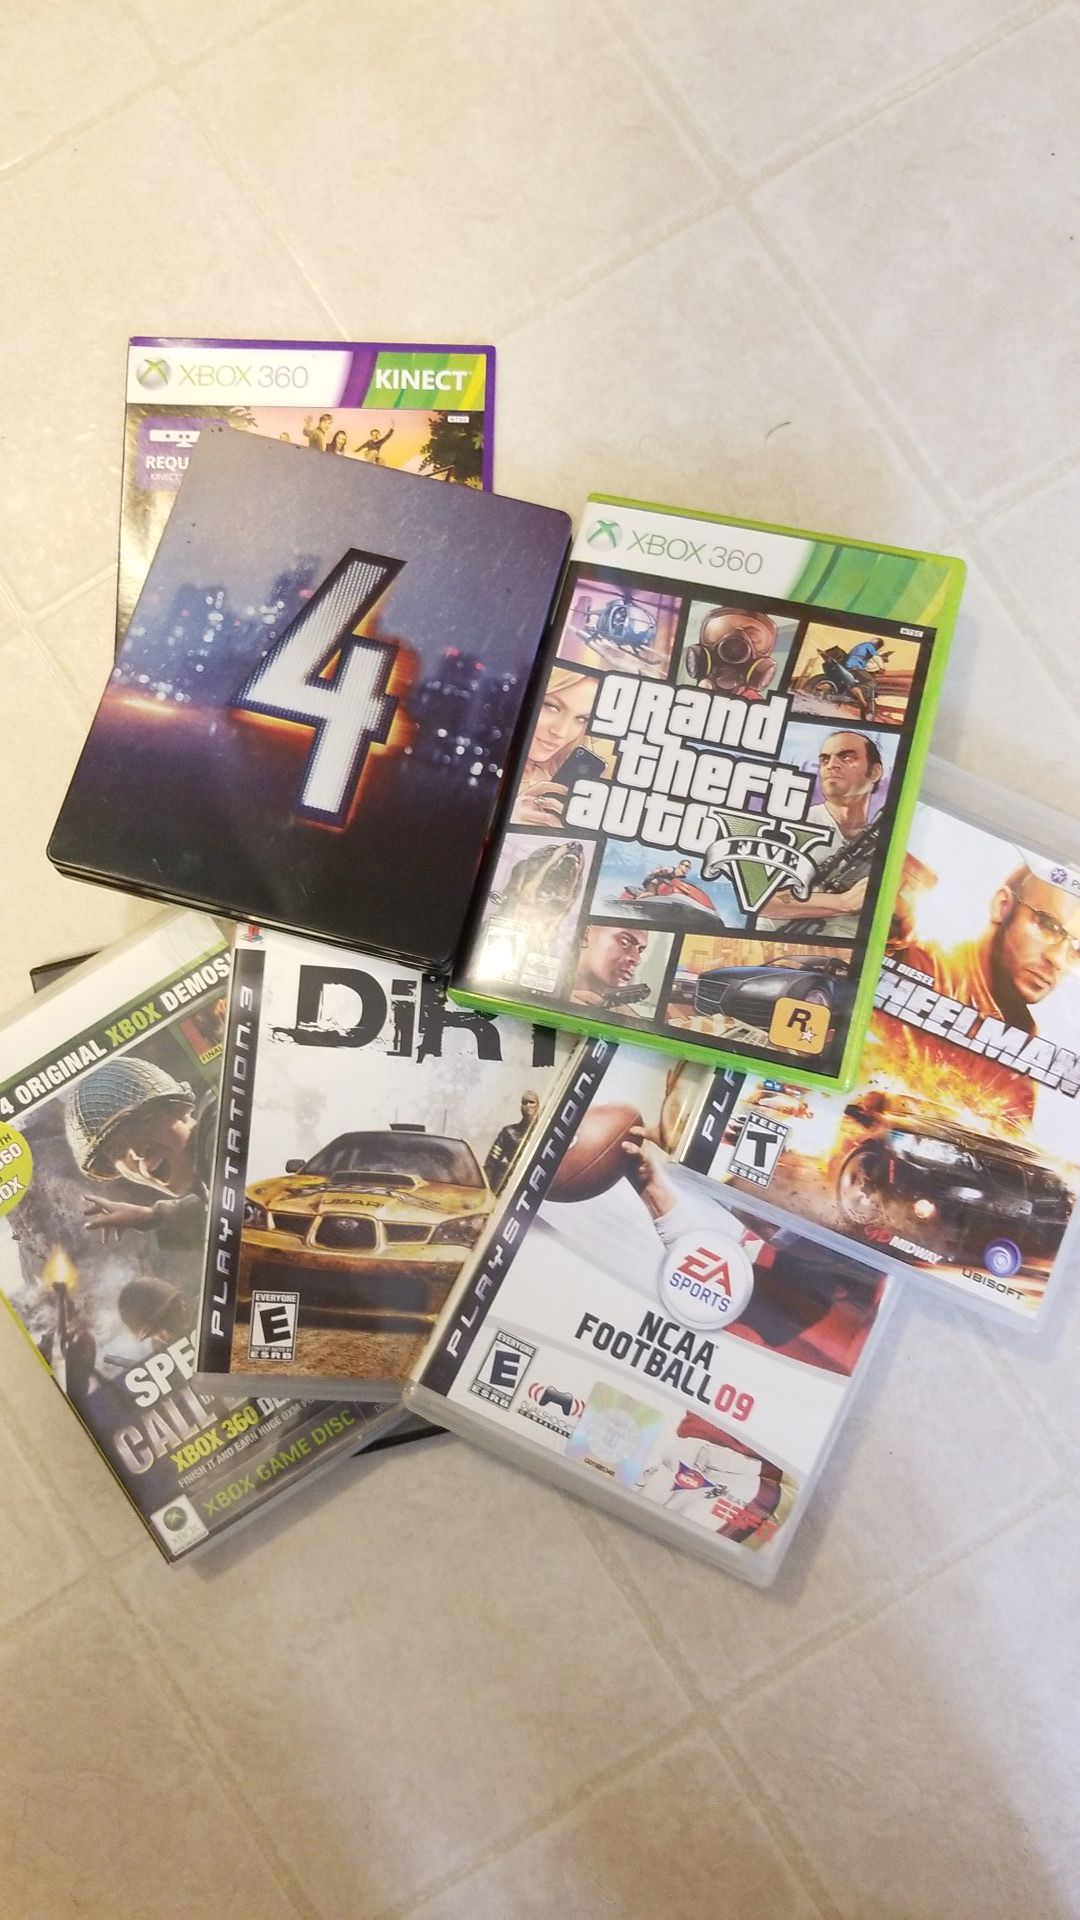 Lot of games. Good condition